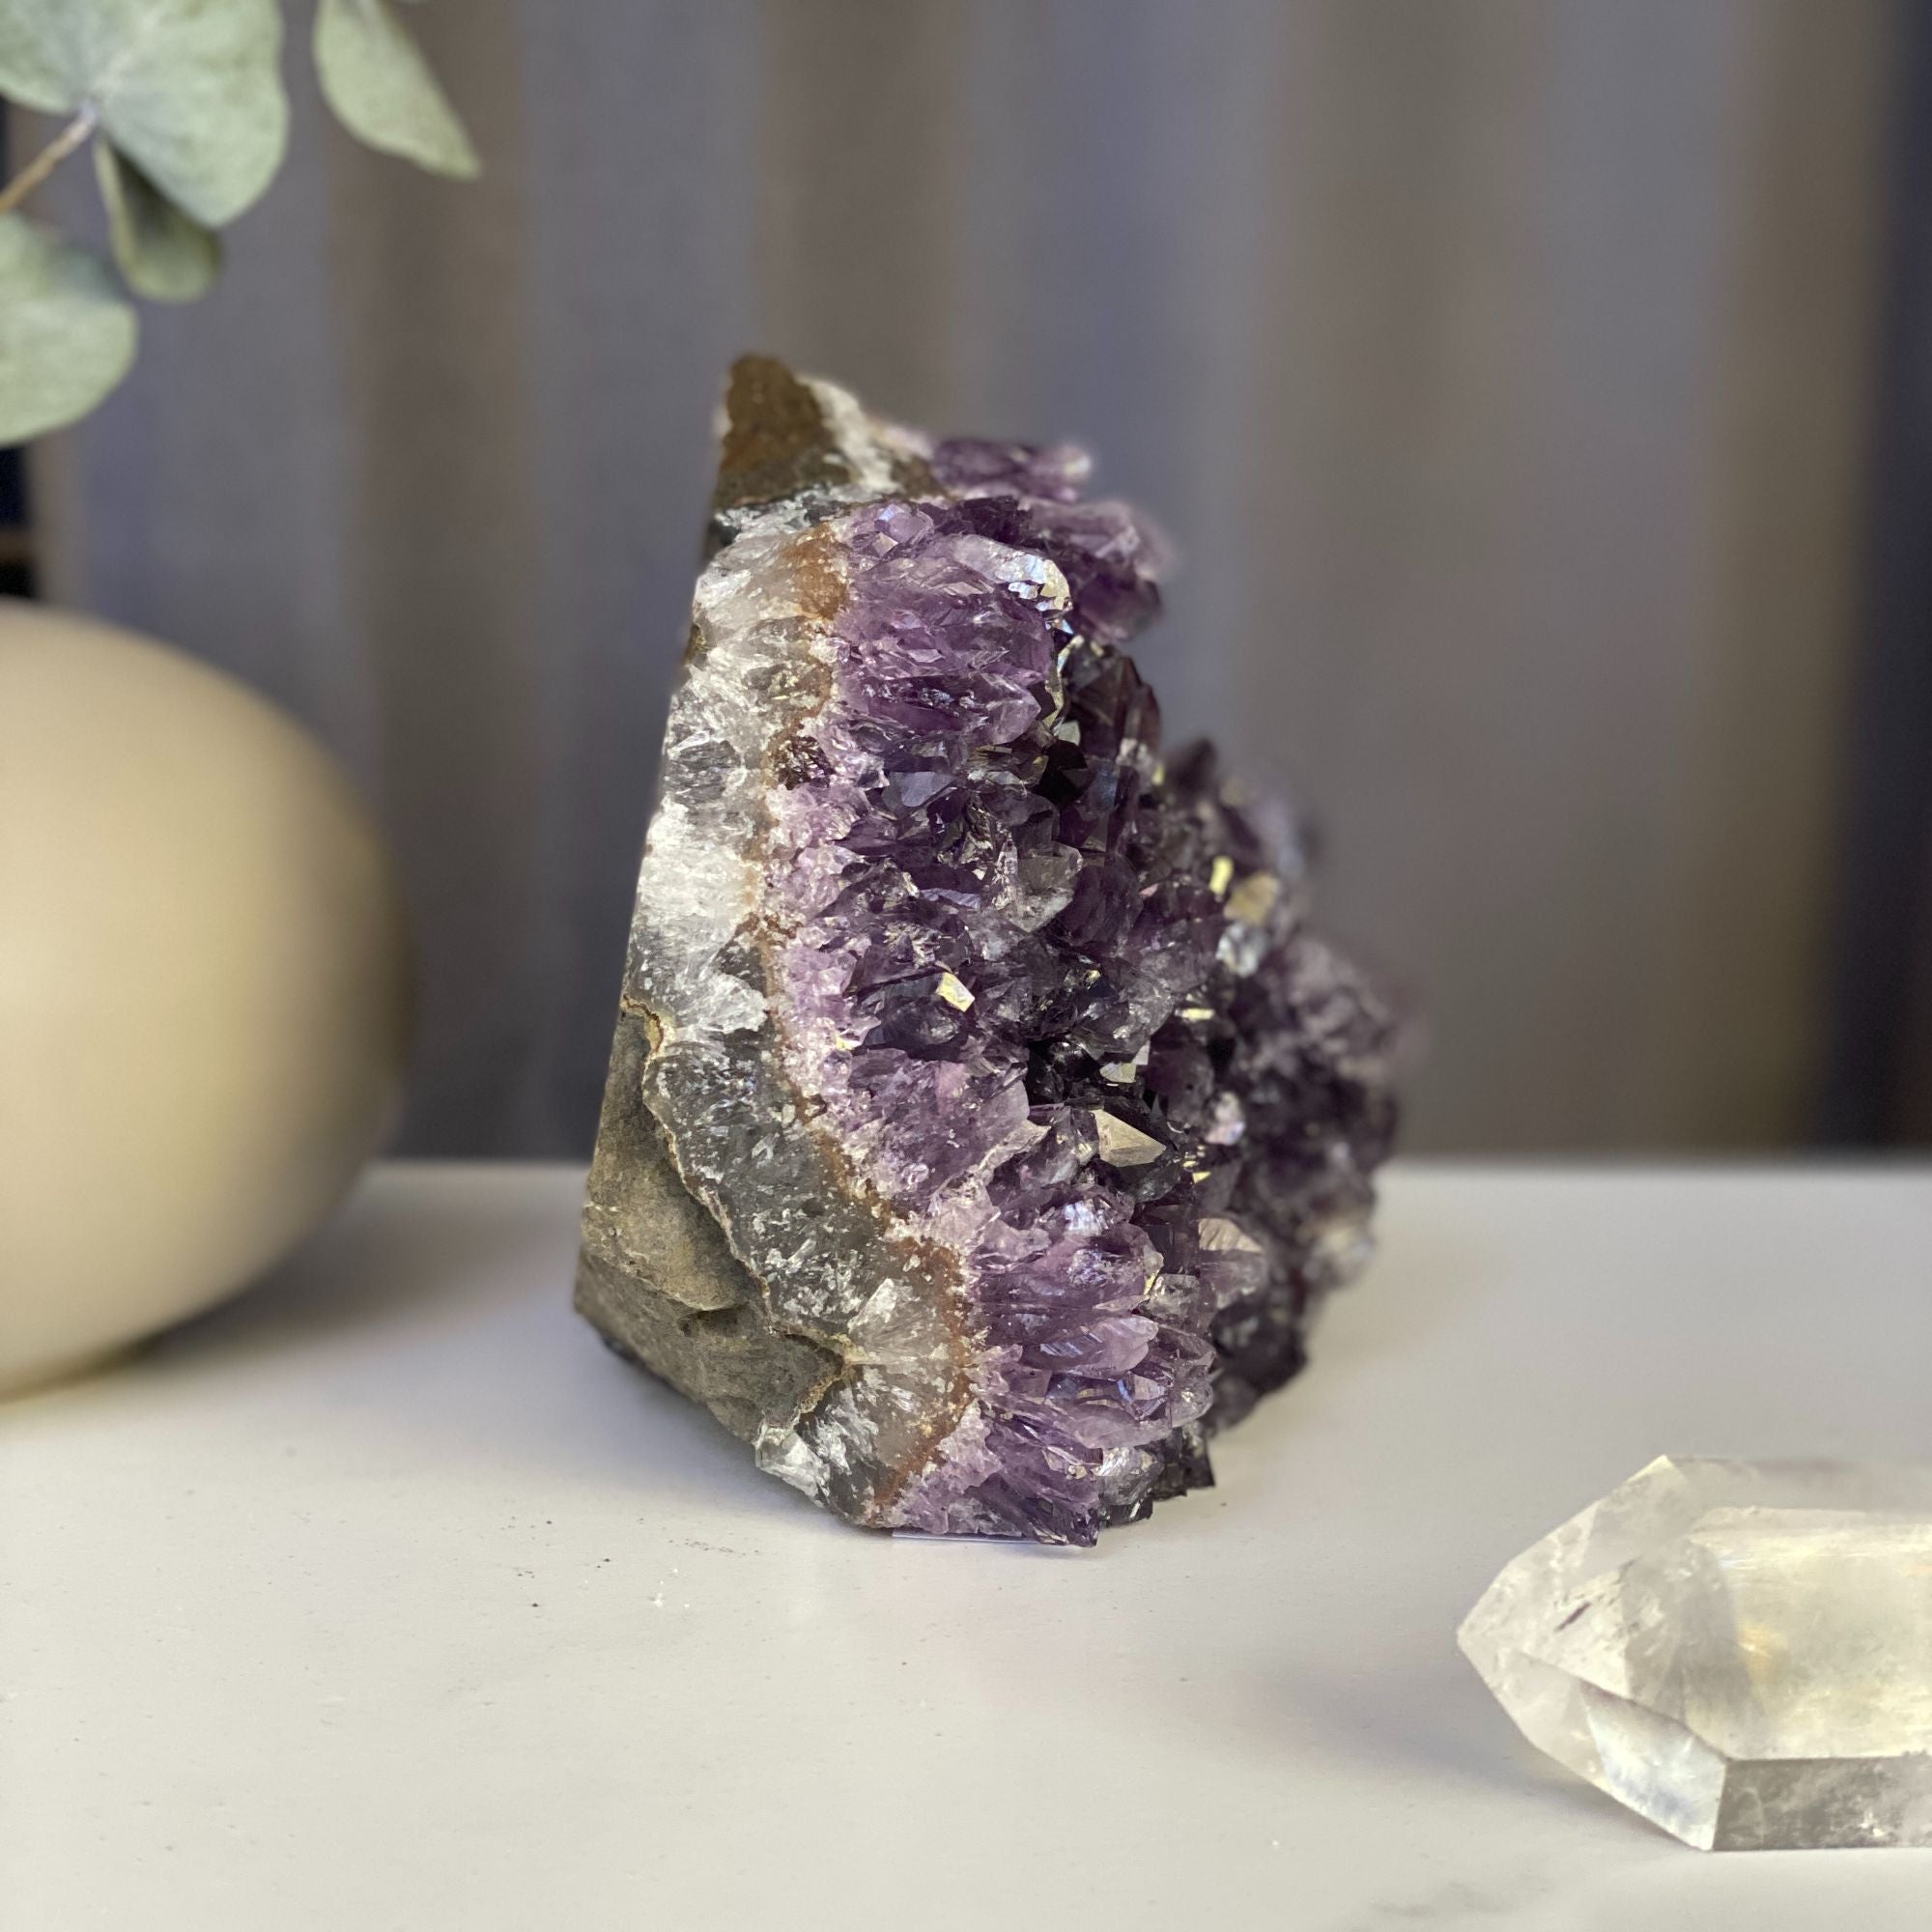 Large crystals (2 Lb) Amethyst geode with Agate formations